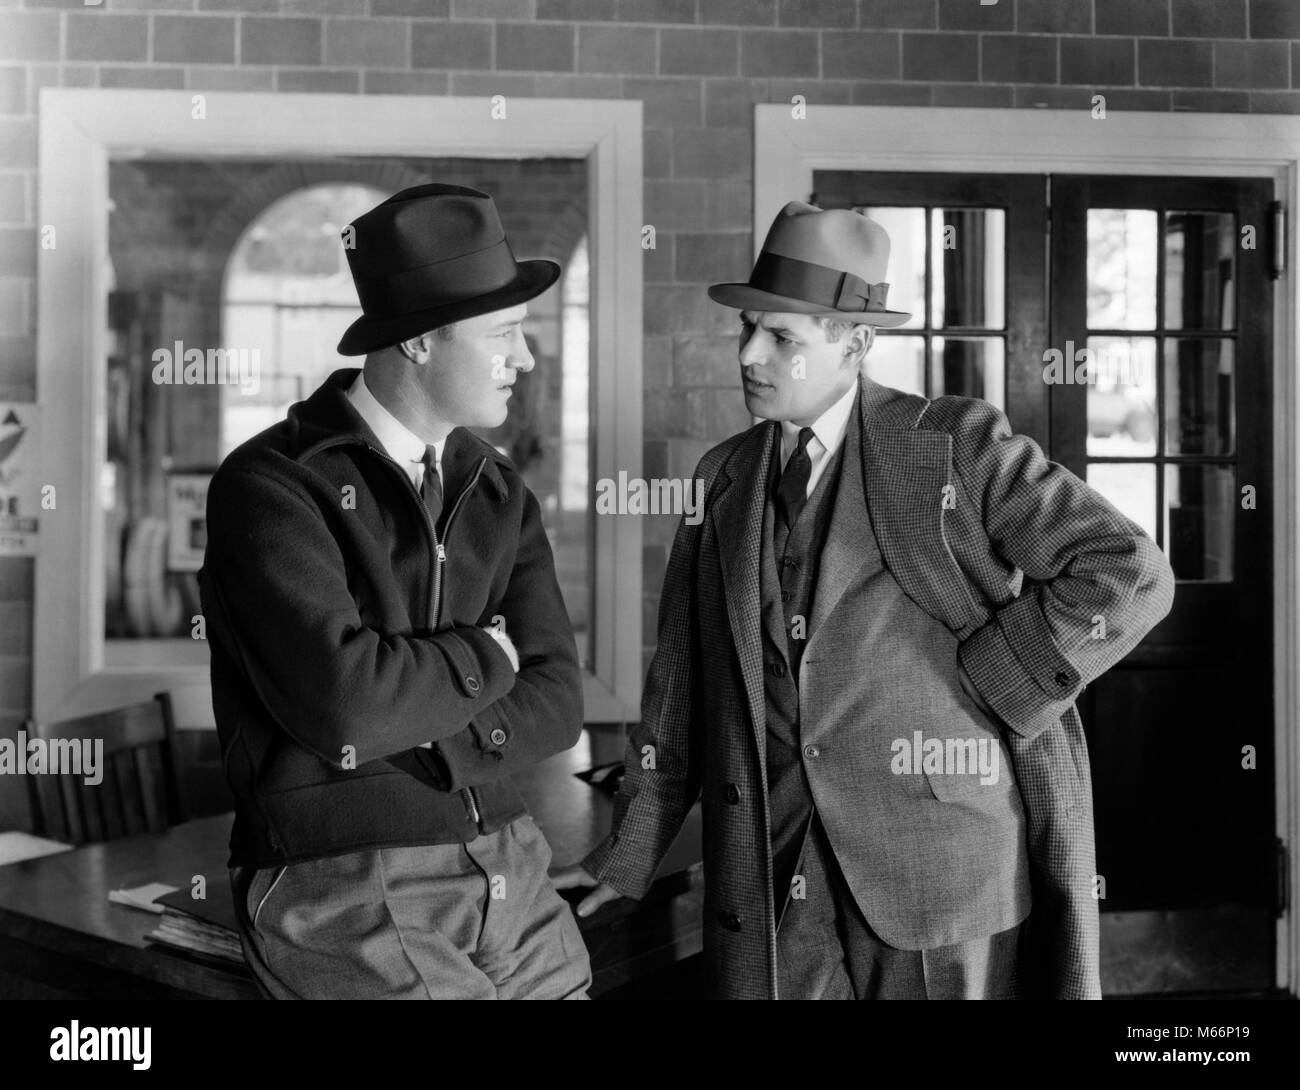 1930s BUSINESSMAN IN SUIT TALKING WITH WORKING MAN EMPLOYEE WEARING JACKET SERIOUS EXPRESSIONS CONVERSATION ON THE JOB - o1810 HAR001 HARS COMMUNICATION TWO PEOPLE CAUCASIAN SATISFACTION JOBS MANAGER COPY SPACE HALF-LENGTH INDOORS EXECUTIVES VEST EXPRESSIONS NOSTALGIA 30-35 YEARS 35-40 YEARS SKILL SUIT AND TIE OCCUPATION SKILLS CUSTOMER SERVICE CONNECTION BOSSES THREE PIECE SUIT SALESMEN EMPLOYEE EMPLOYEES MALES MANAGERS MID-ADULT MID-ADULT MAN B&W BLACK AND WHITE CAUCASIAN ETHNICITY CONTRACTOR OCCUPATIONS OLD FASHIONED PERSONS Stock Photo